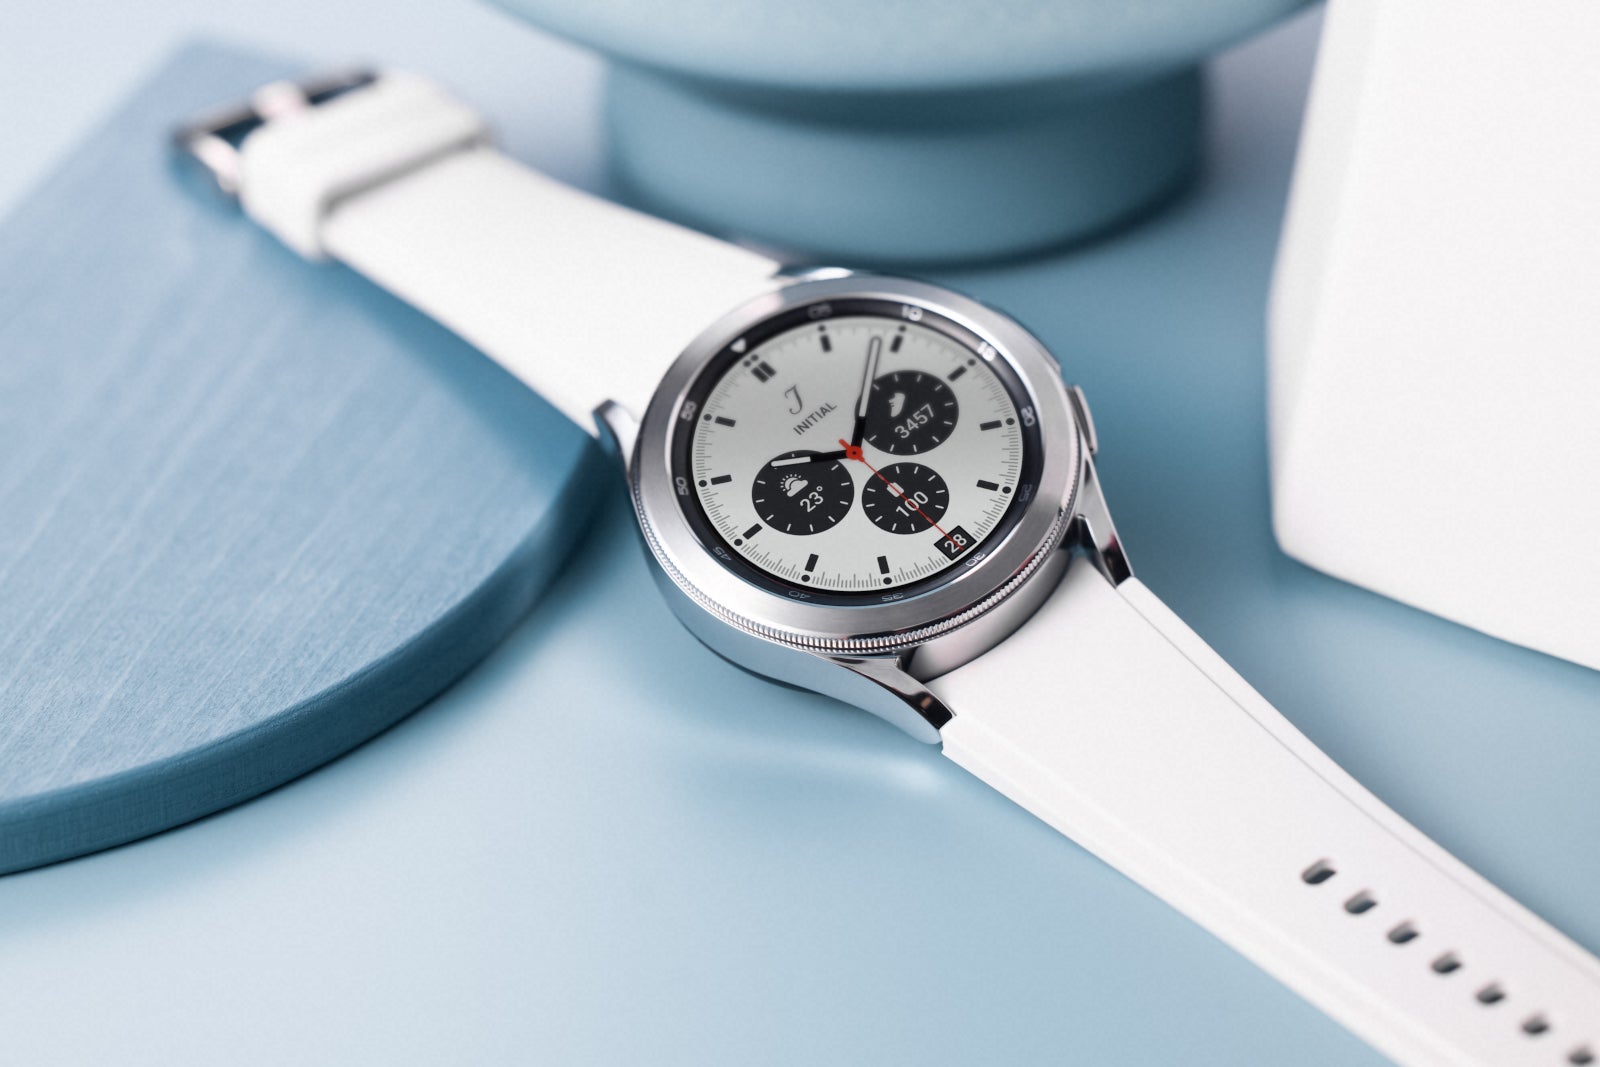 Samsung Galaxy Watch 4 Classic release date, price, features and news